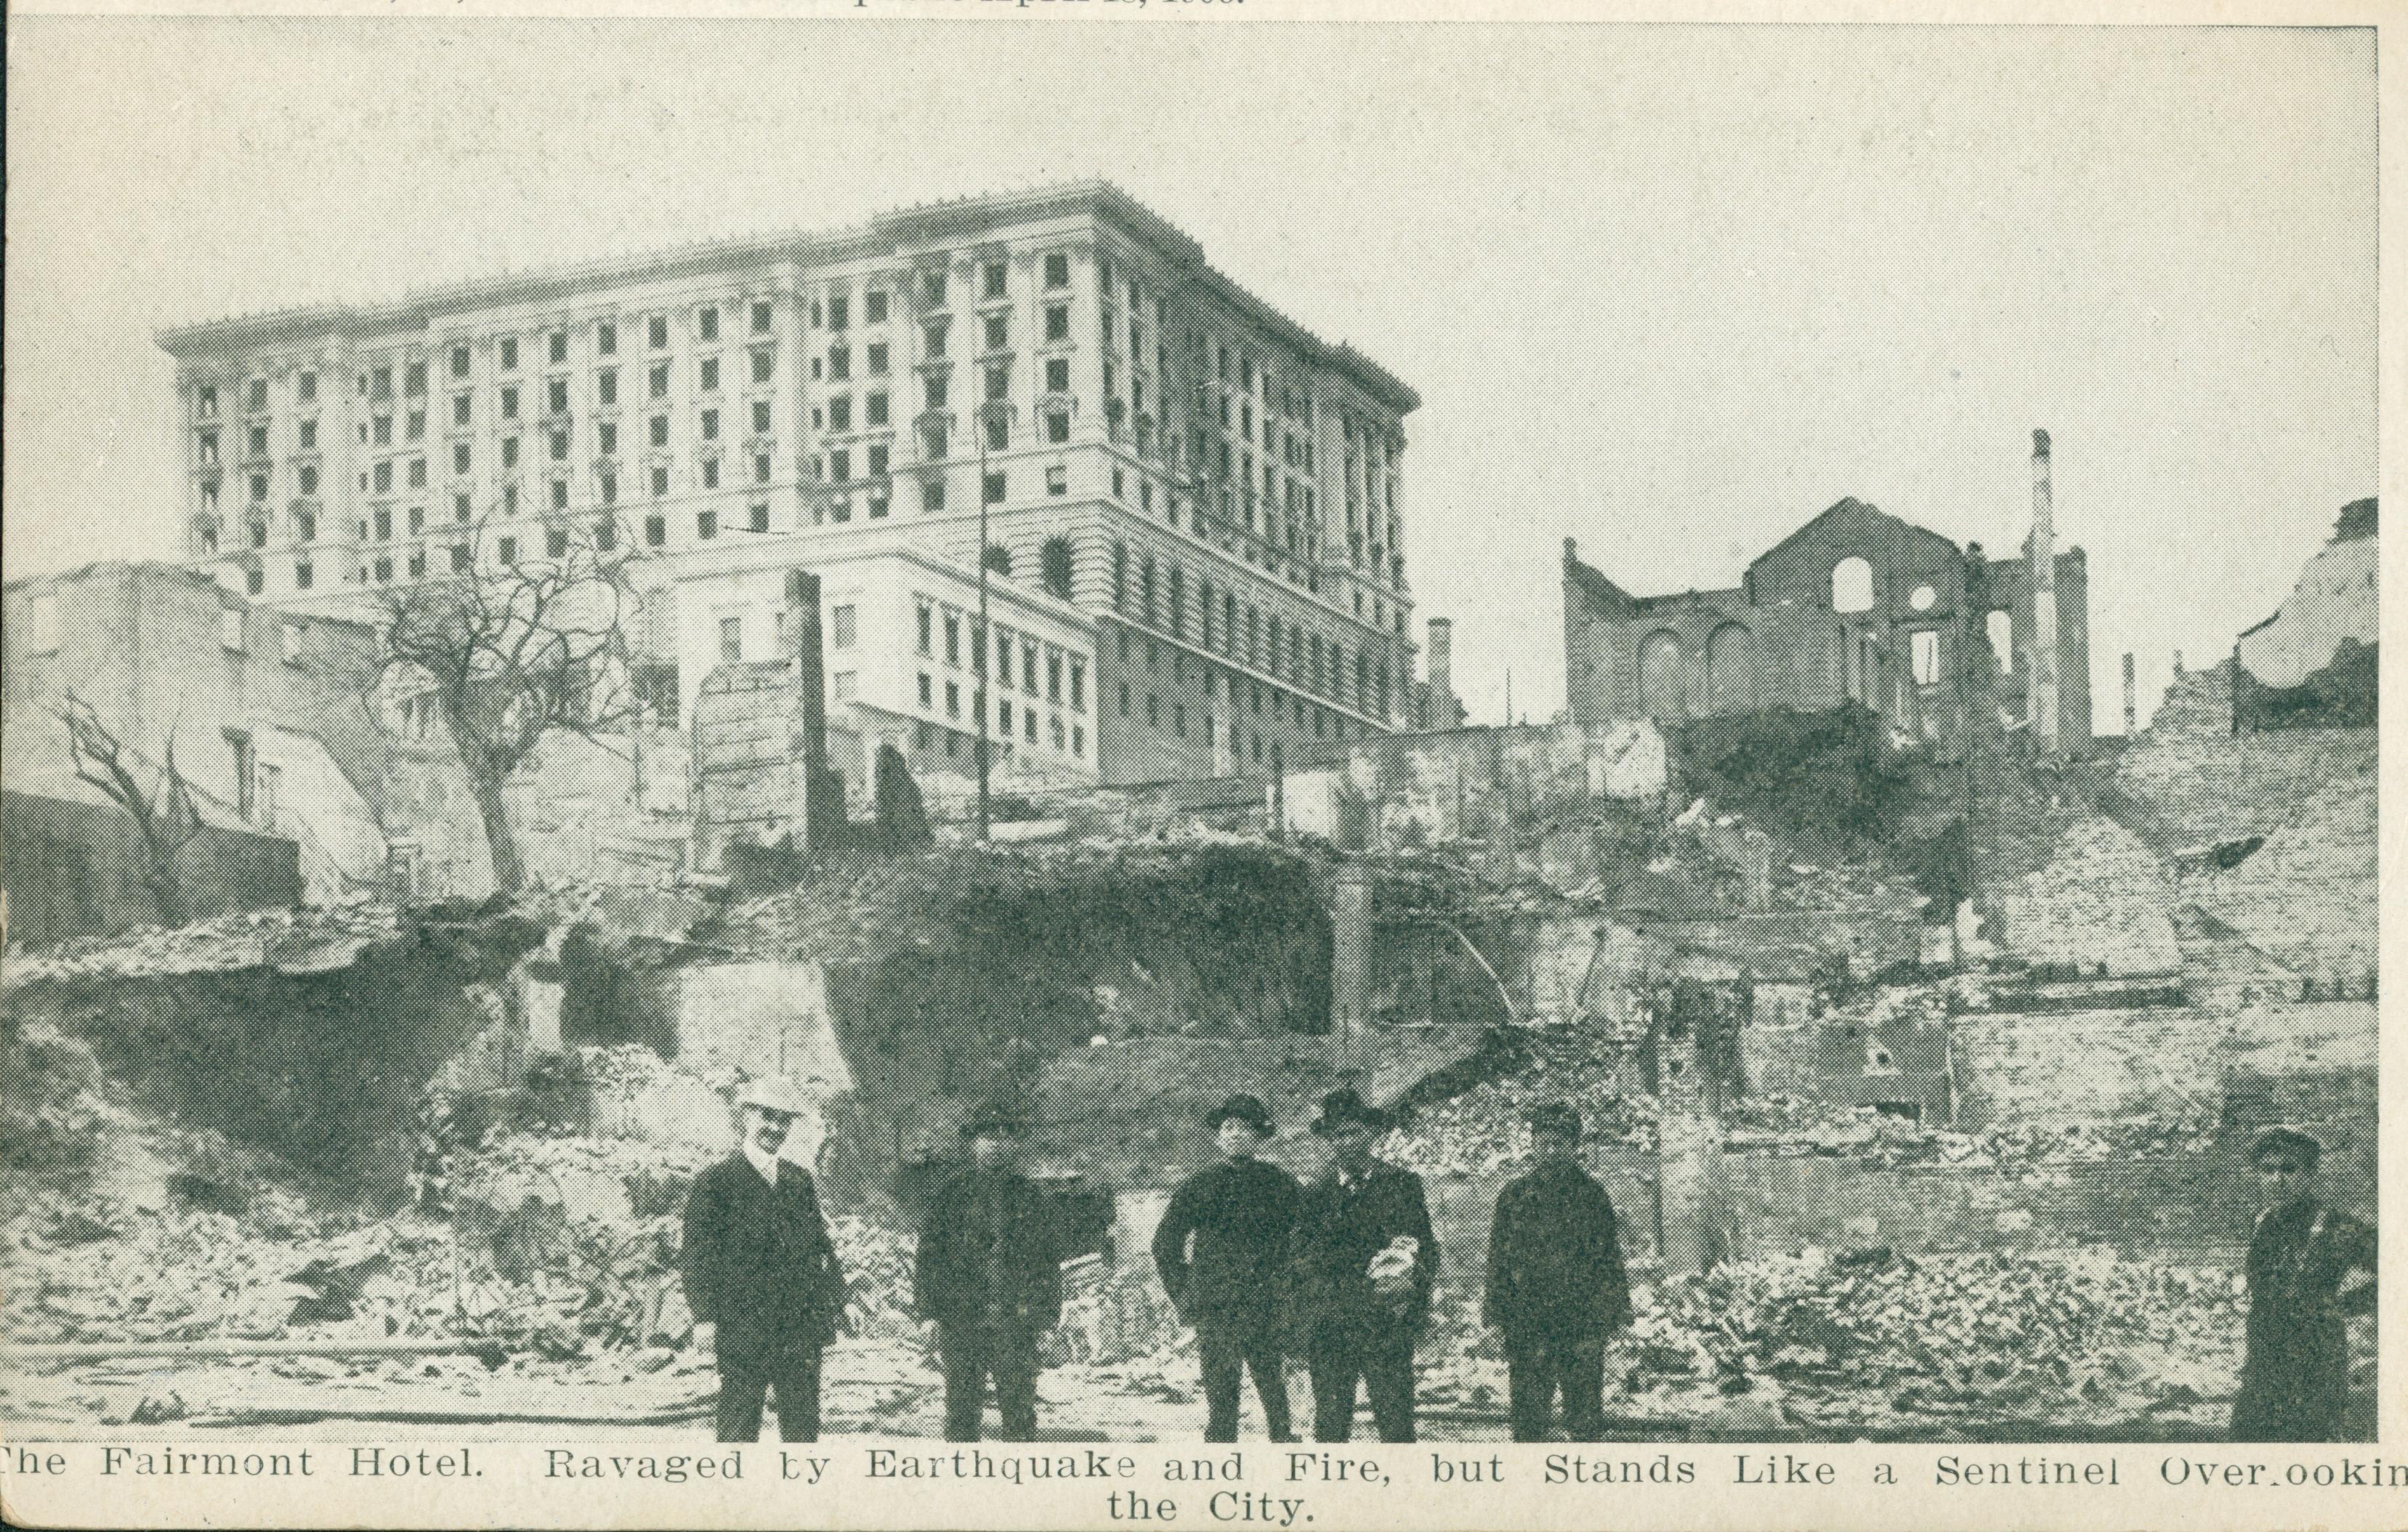 Shows the Fairmont Hotel after the earthquake